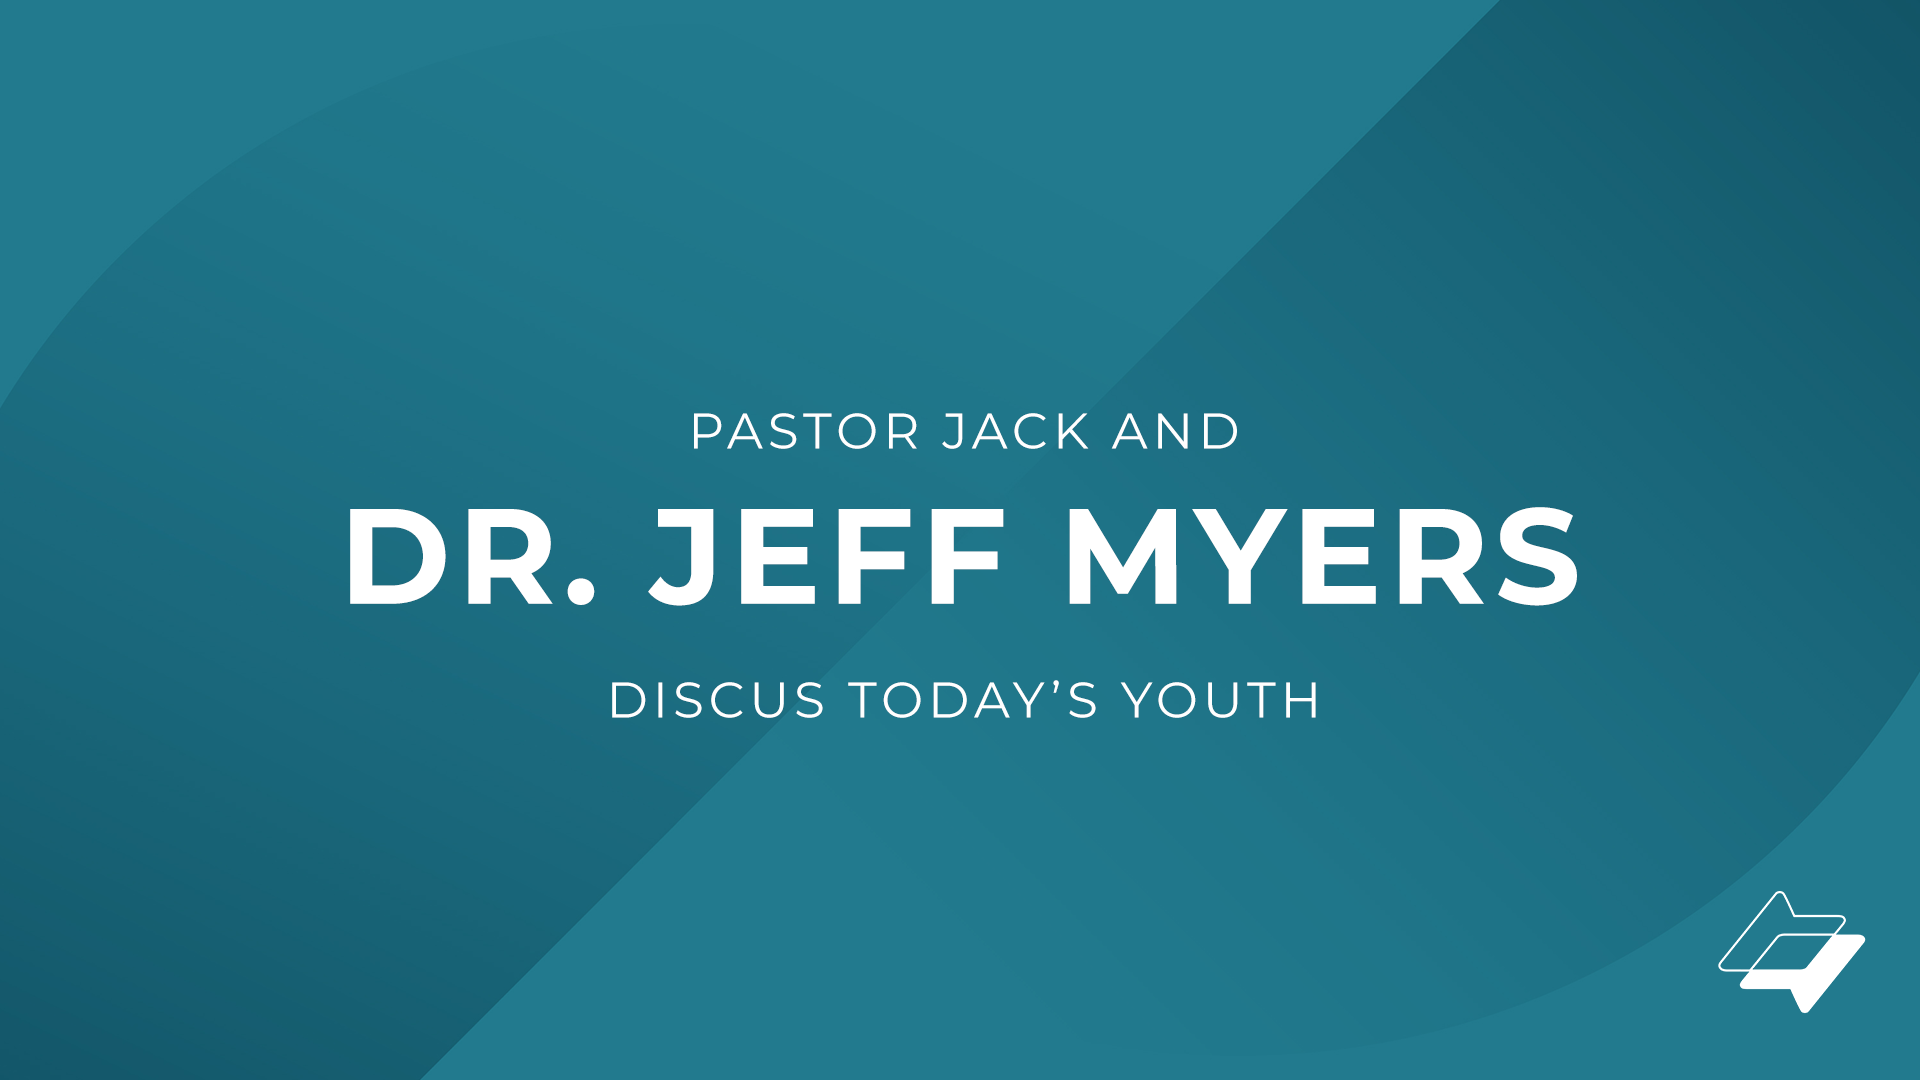 Pastor Jack and Dr. Jeff Myers of Summit Ministries Discuss Today’s Youth